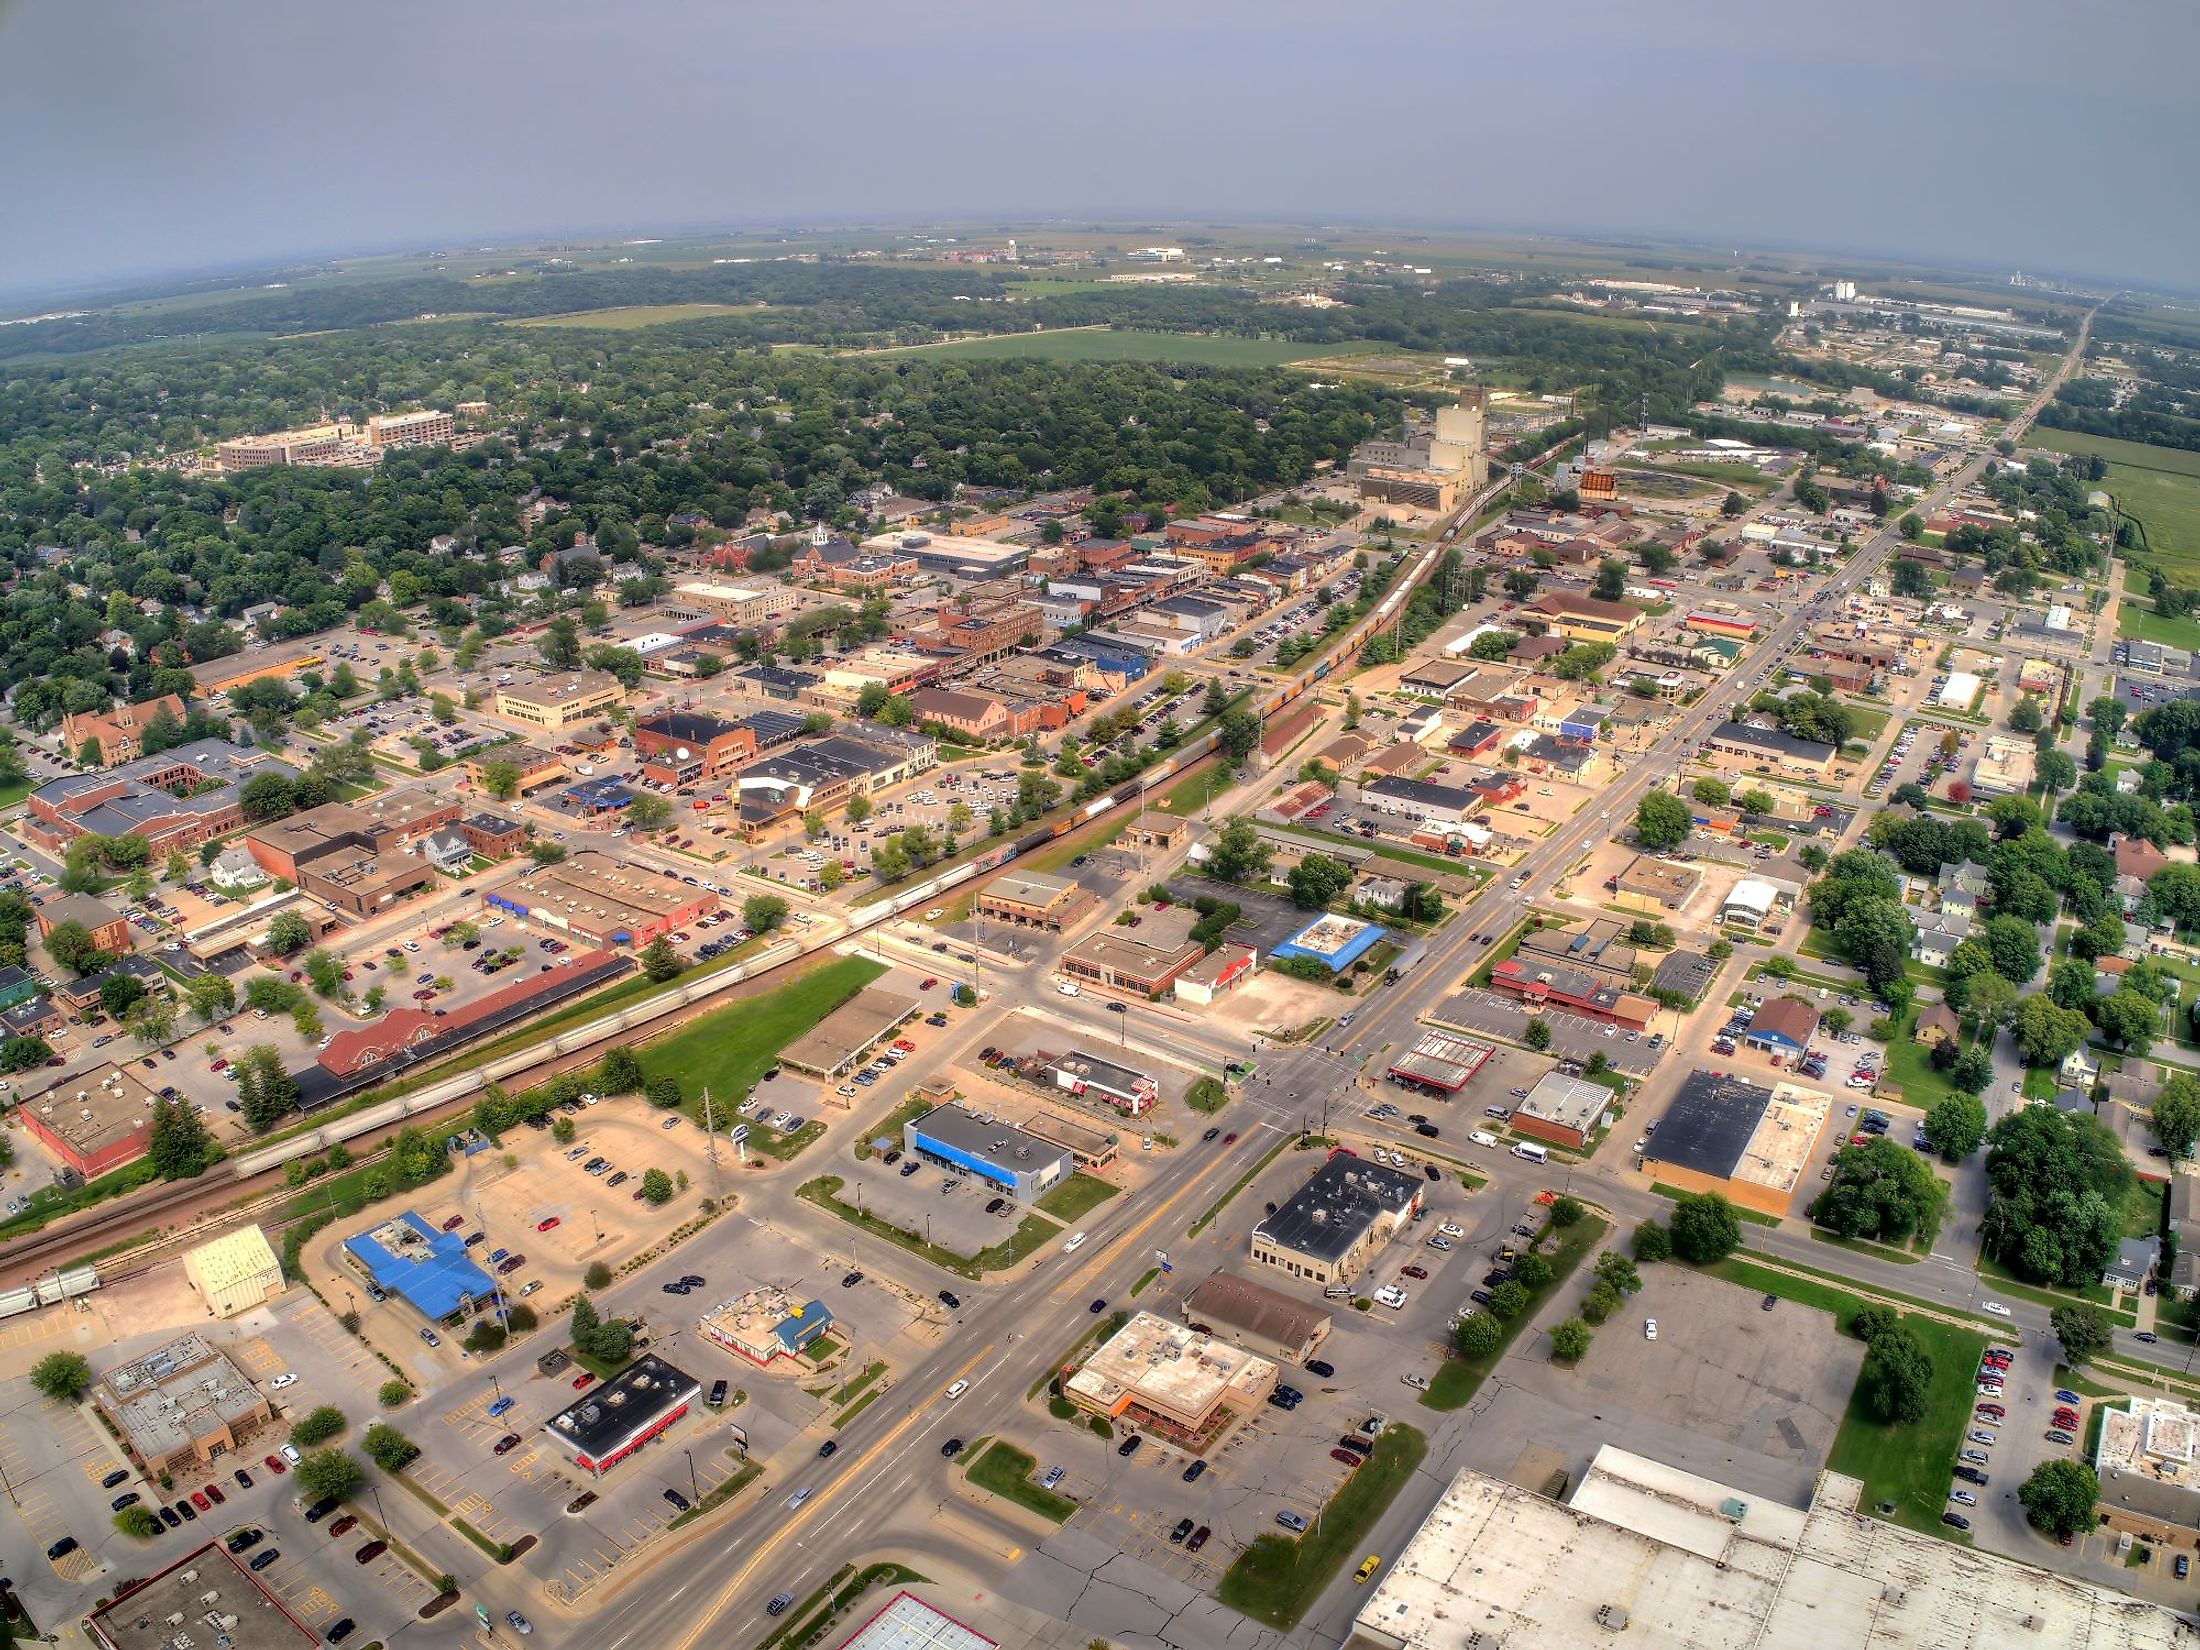 Aerial view of Ames, Iowa